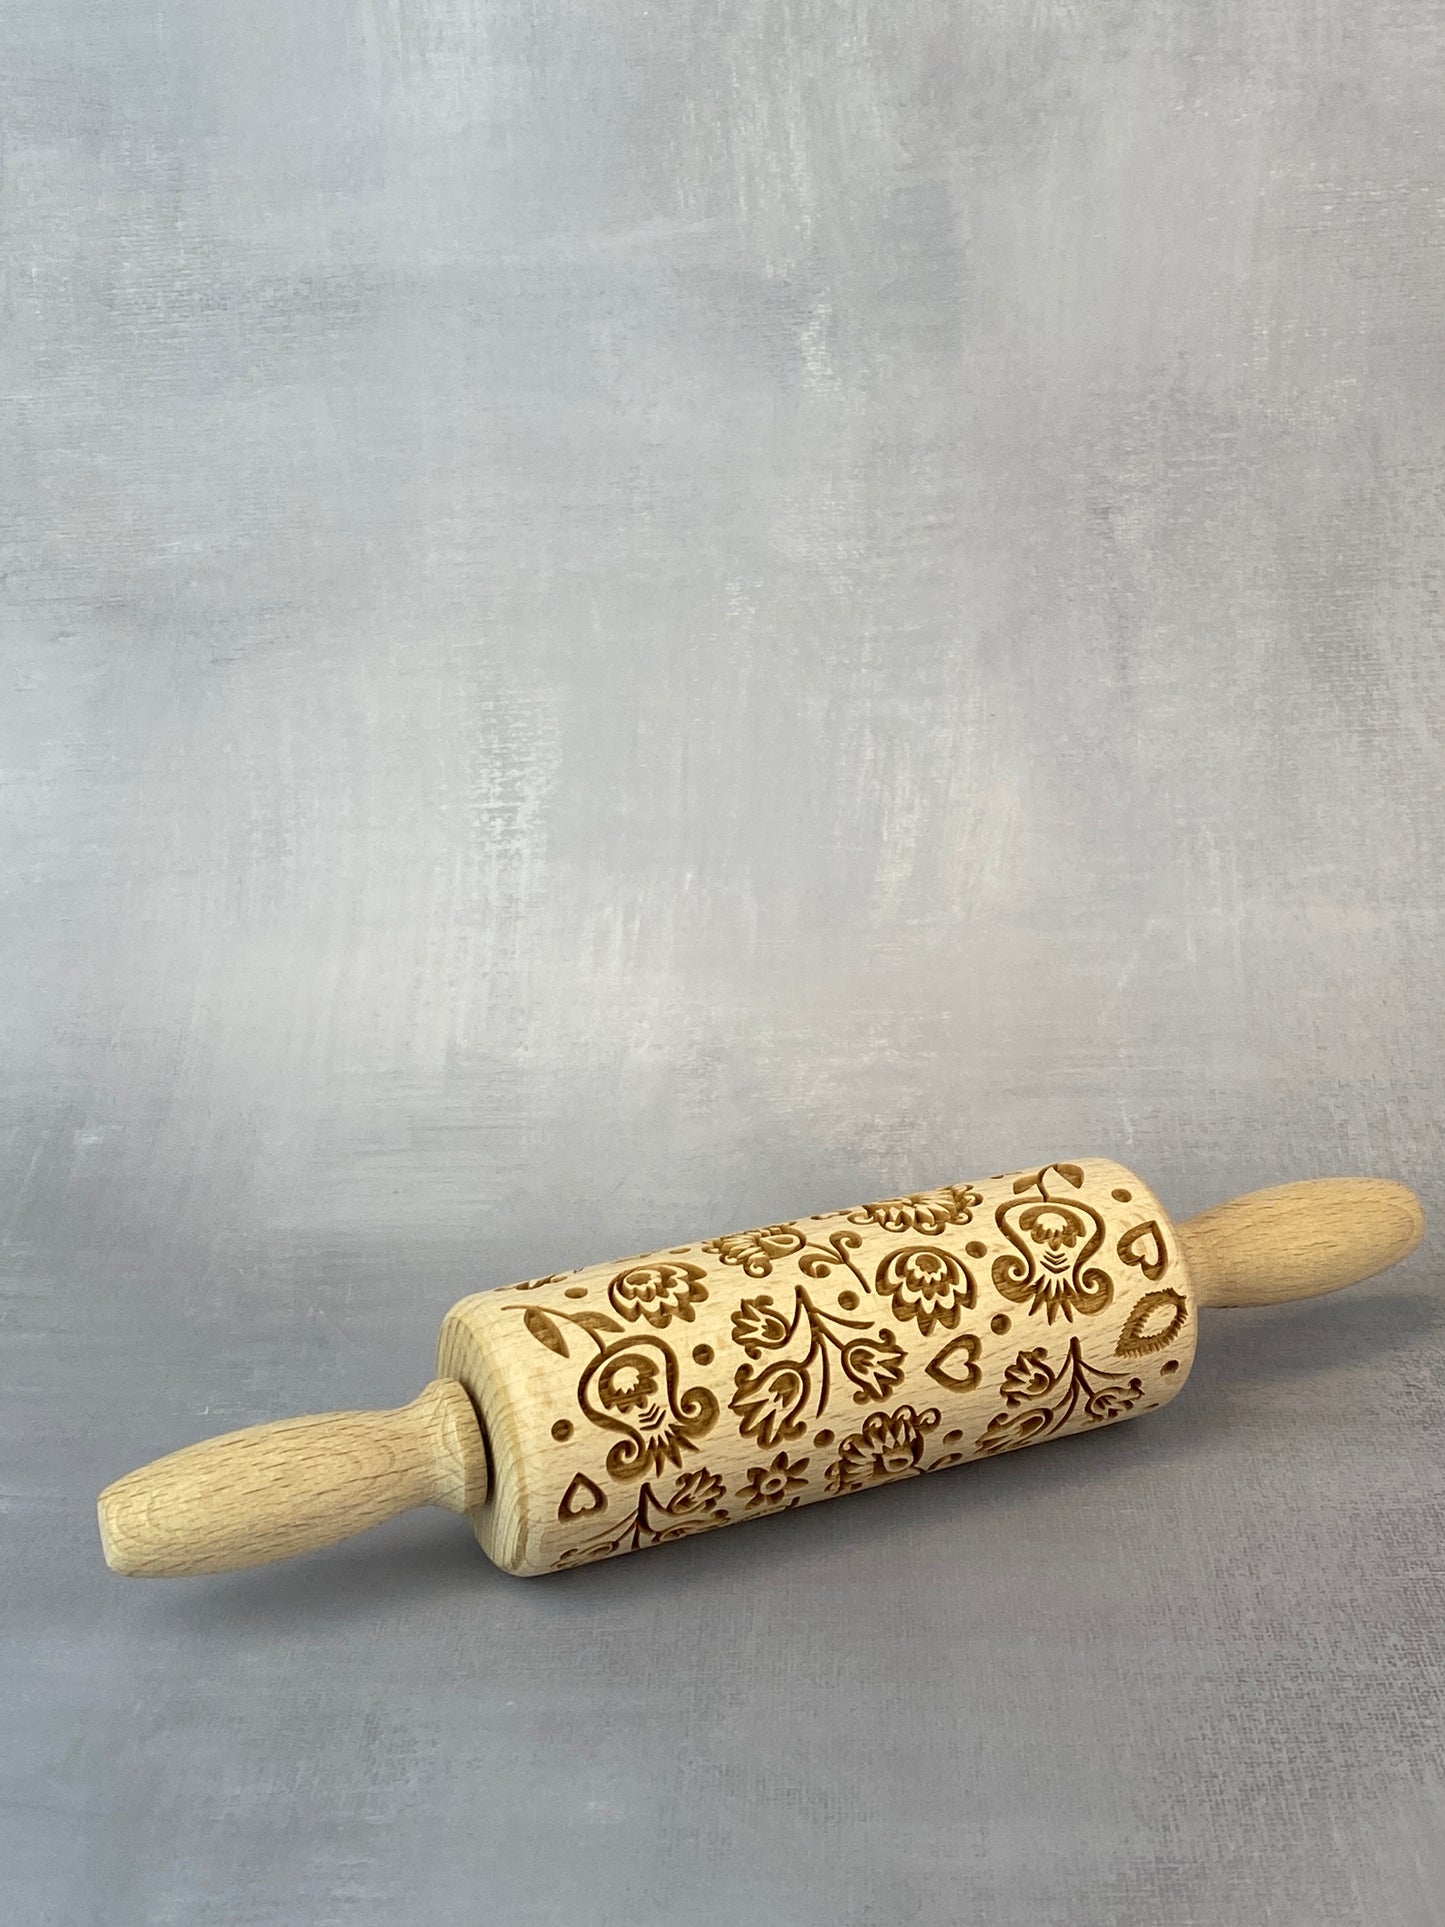 Wooden Rolling Pin - Whimsical Folk